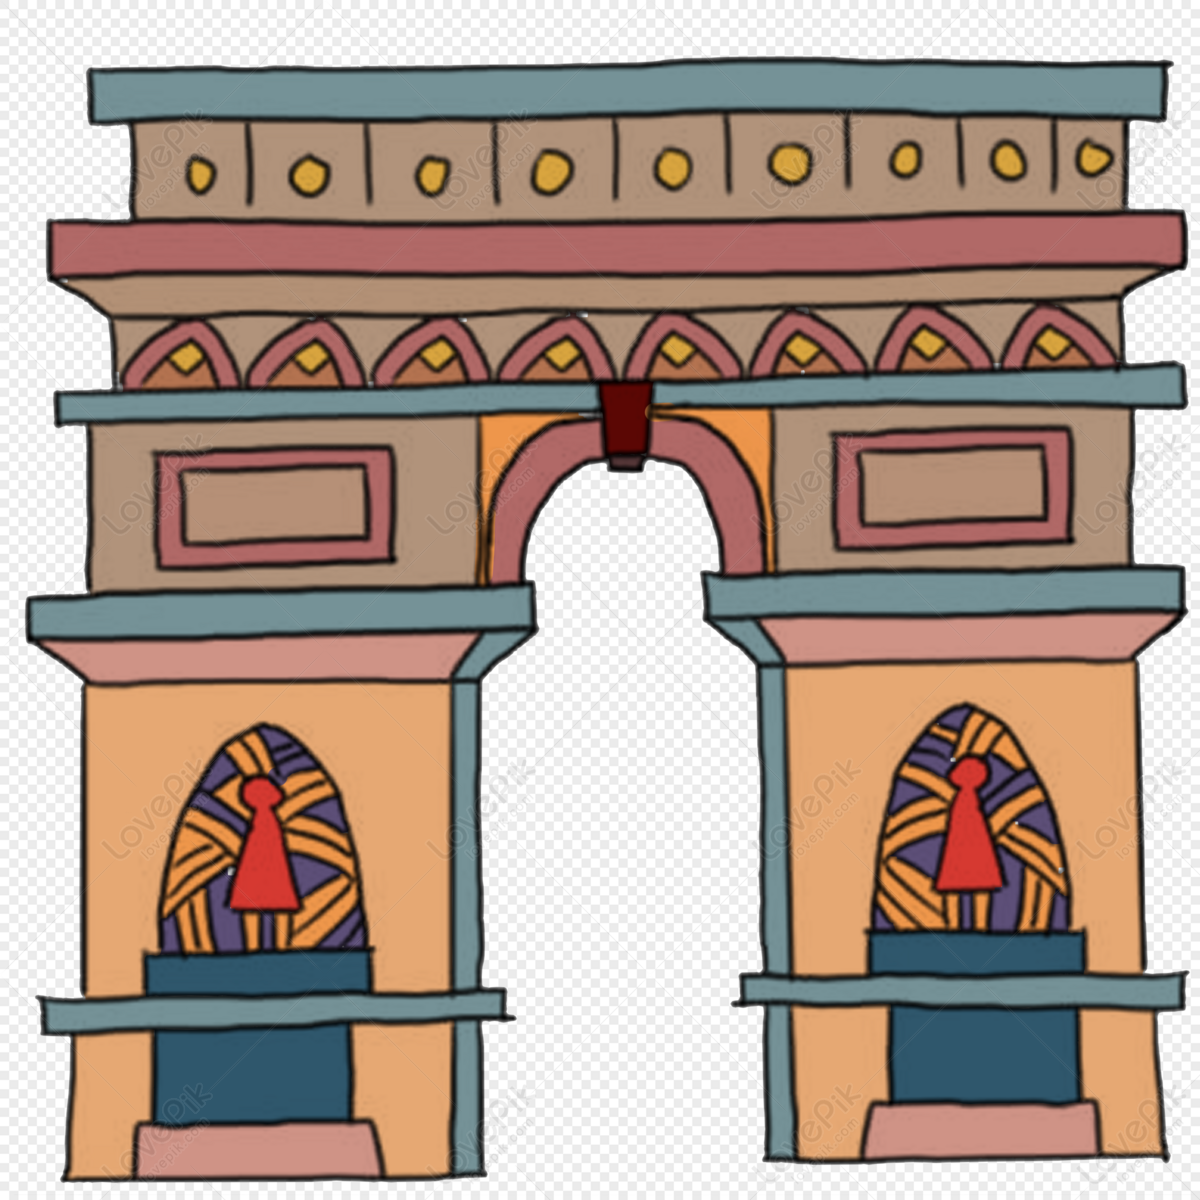 City Gate PNG Image And Clipart Image For Free Download - Lovepik |  401261628